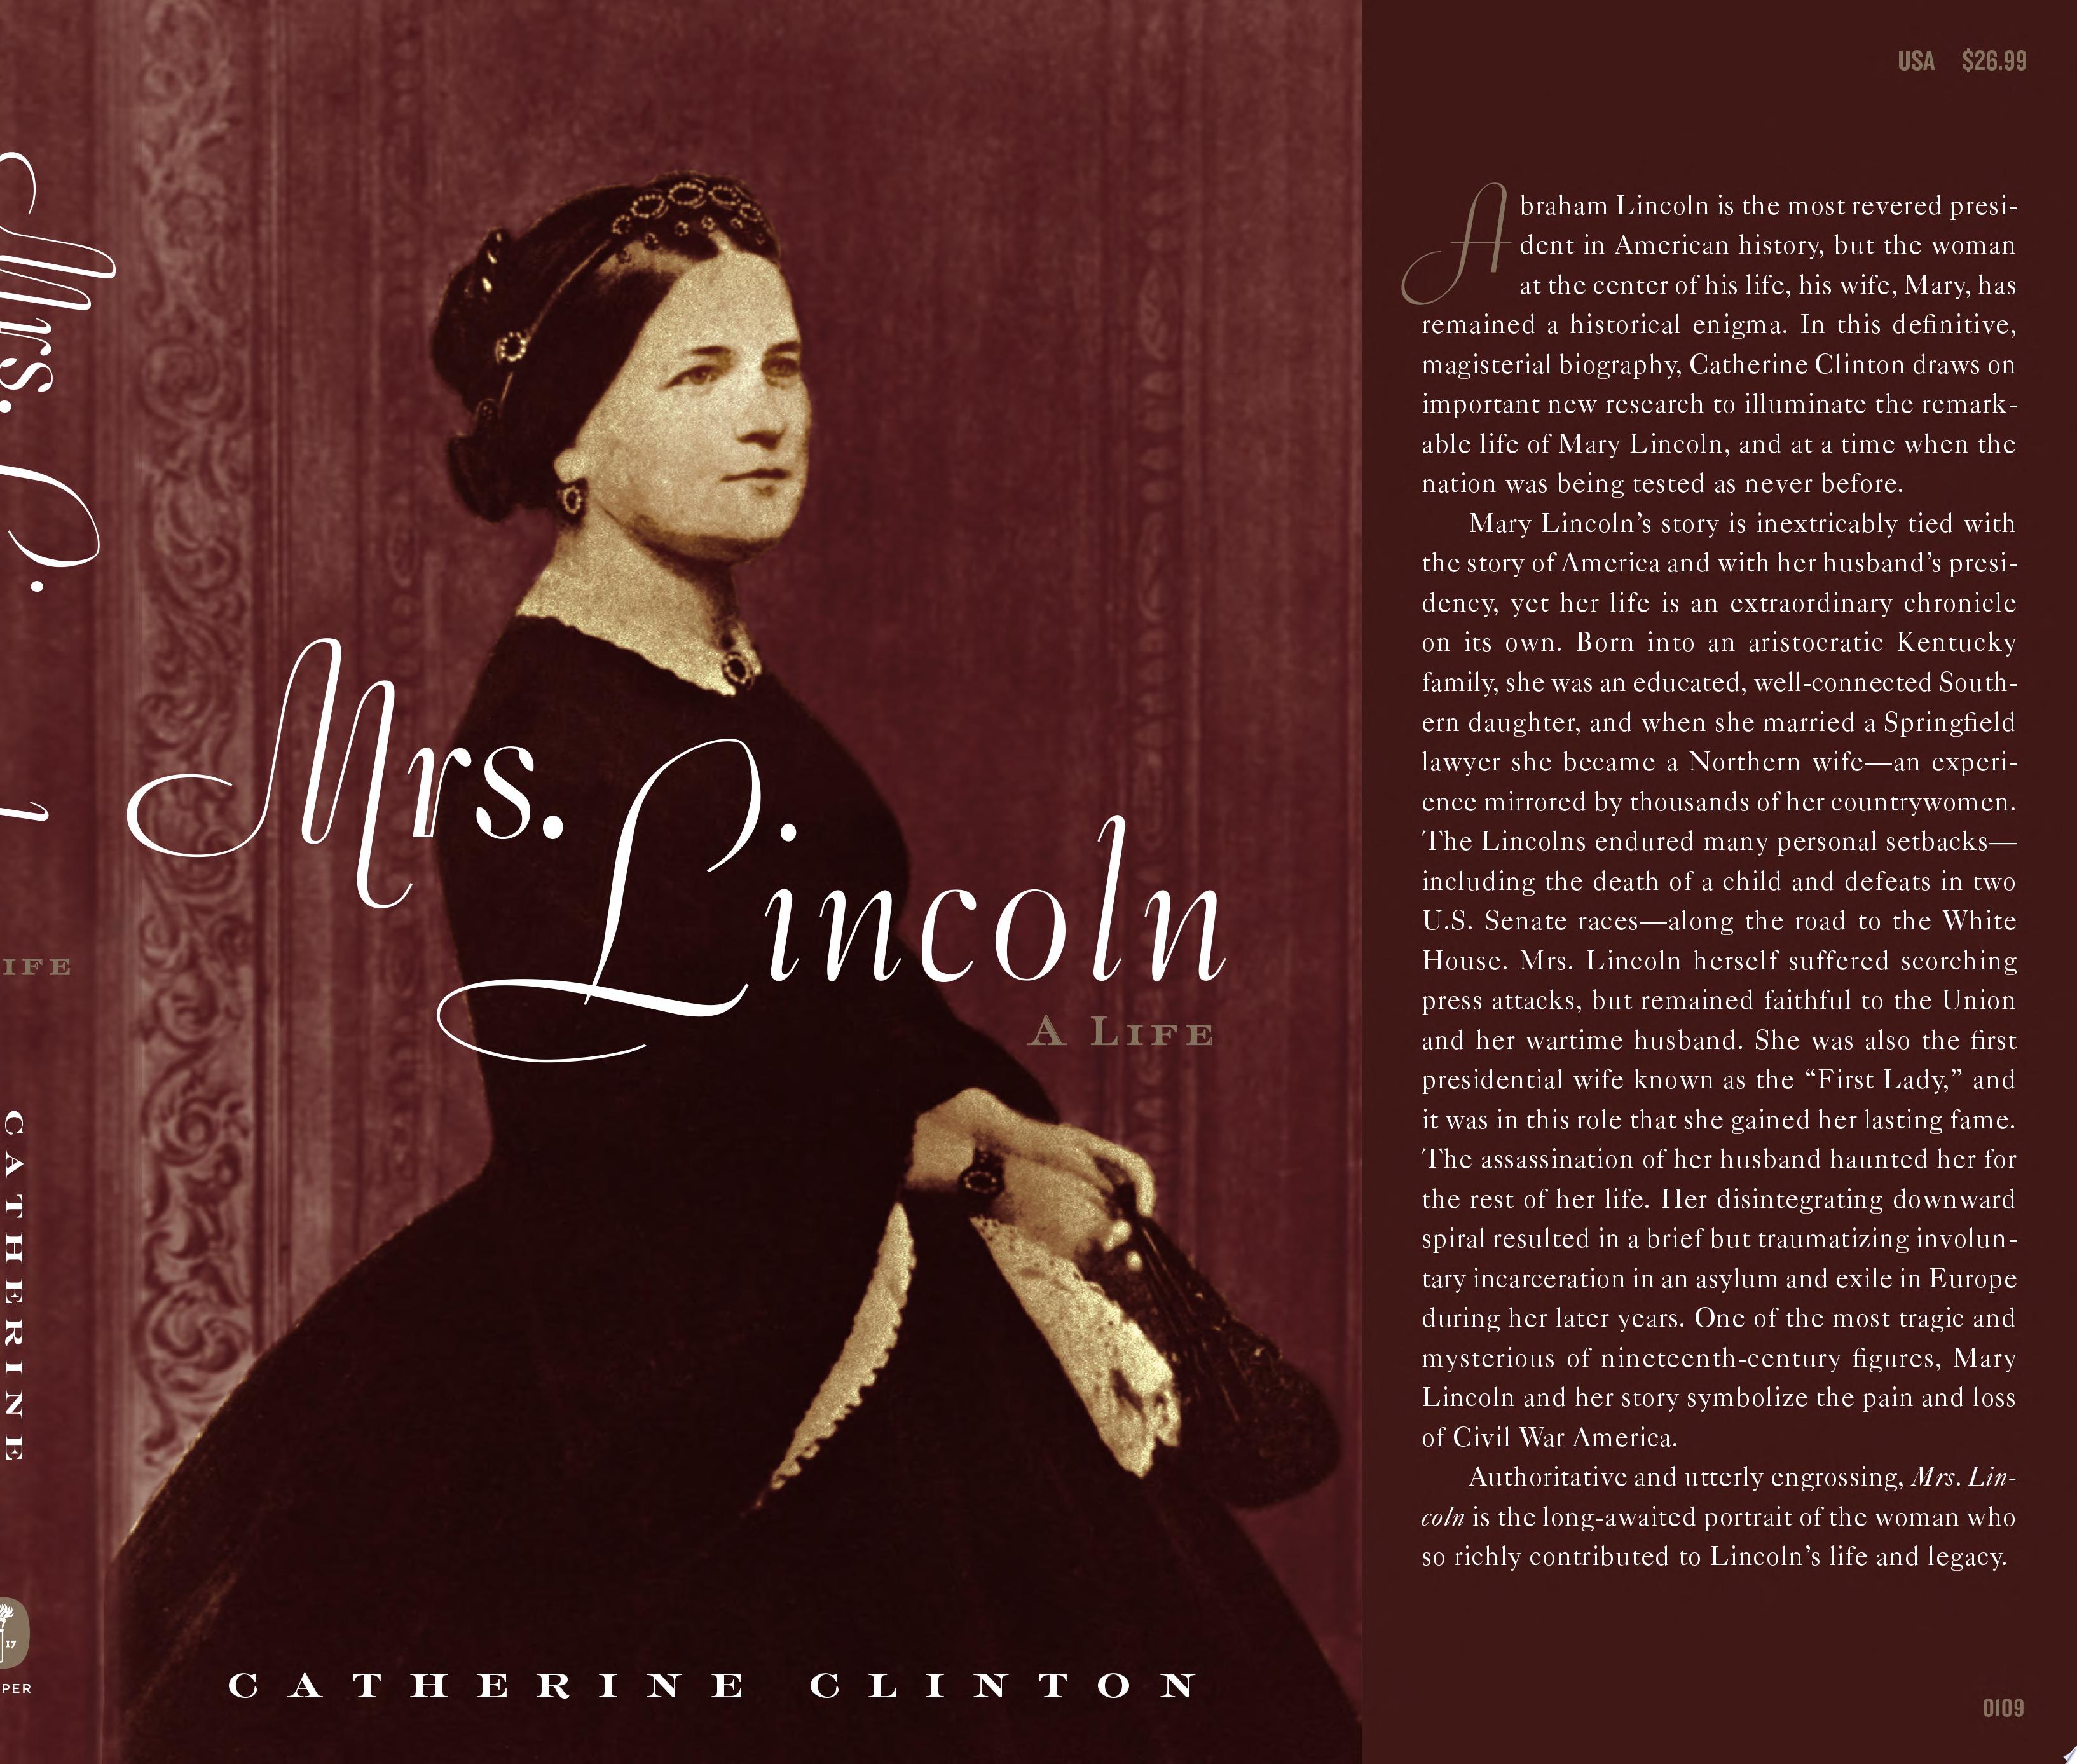 Image for "Mrs. Lincoln"